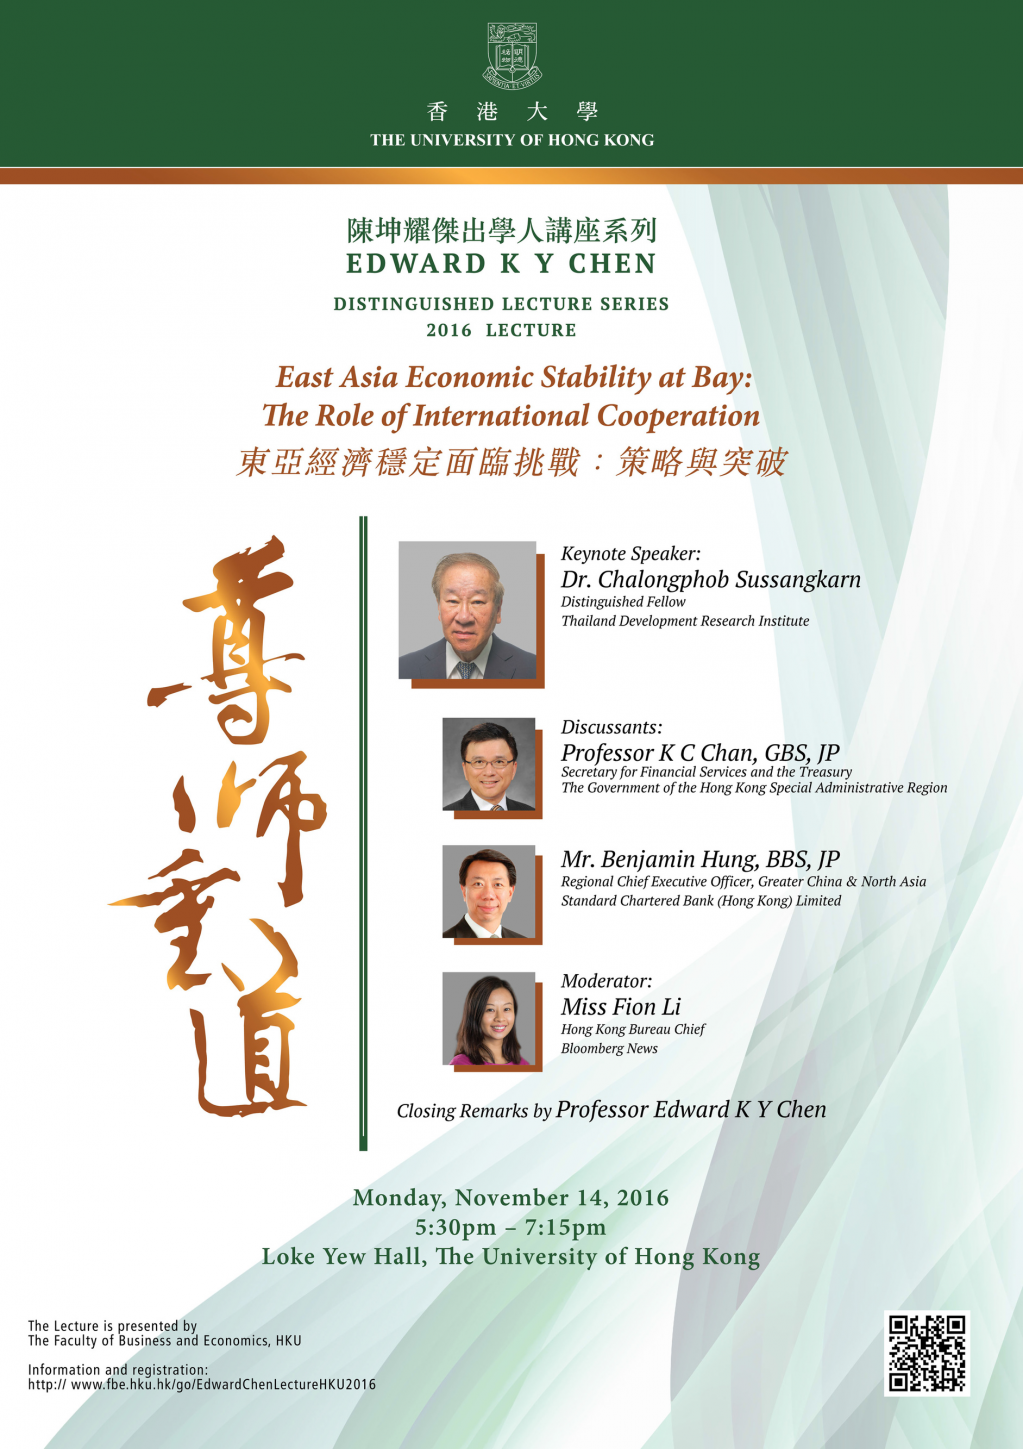 EDWARD K Y CHEN DISTINGUISHED LECTURE SERIES 2016 陳坤耀傑出學人講座系列 2016 